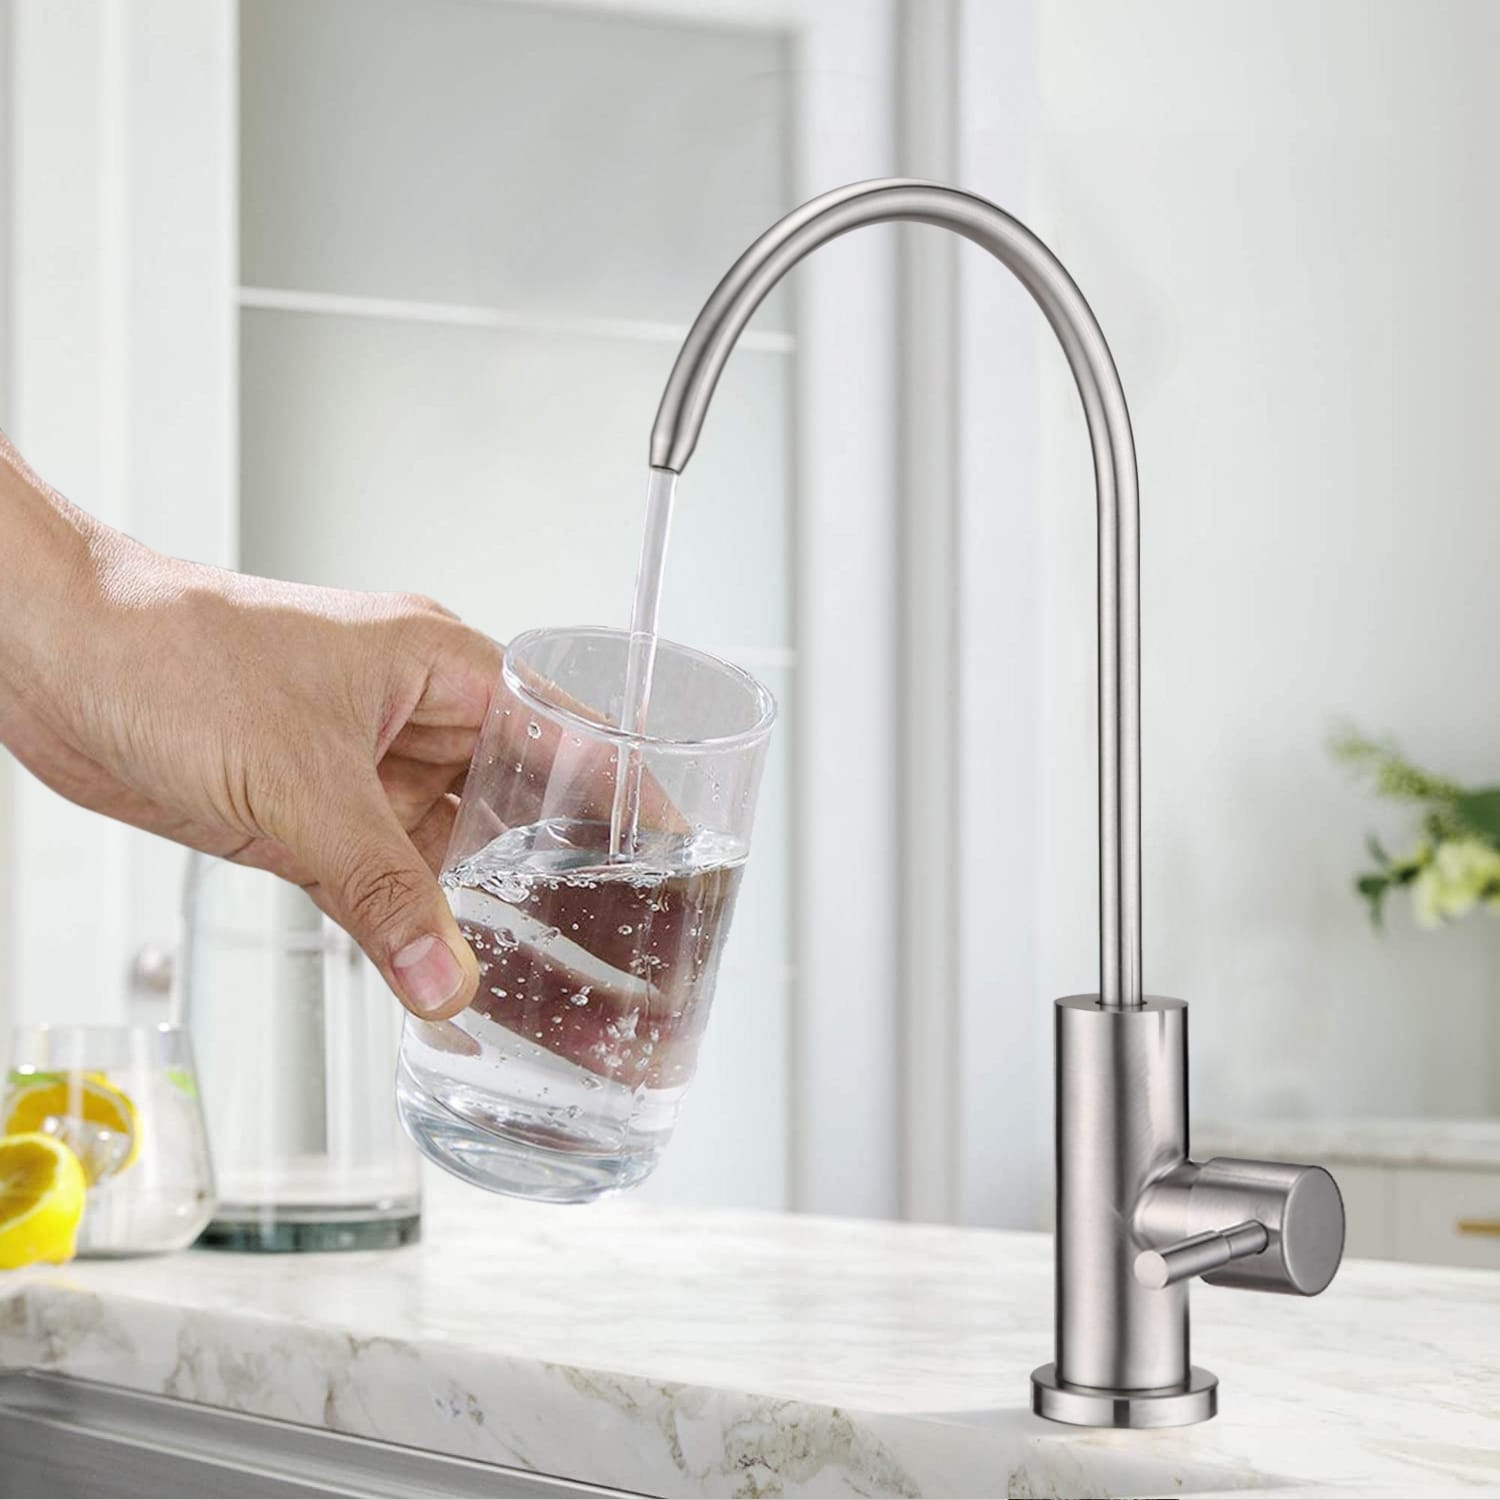 https://ak1.ostkcdn.com/images/products/is/images/direct/d7db02db9f1c78e0722b3414c017b5aa953d5c41/Kitchen-Water-Filter-Faucet%2C-Lead-Free-Drinking-Water-Faucet.jpg